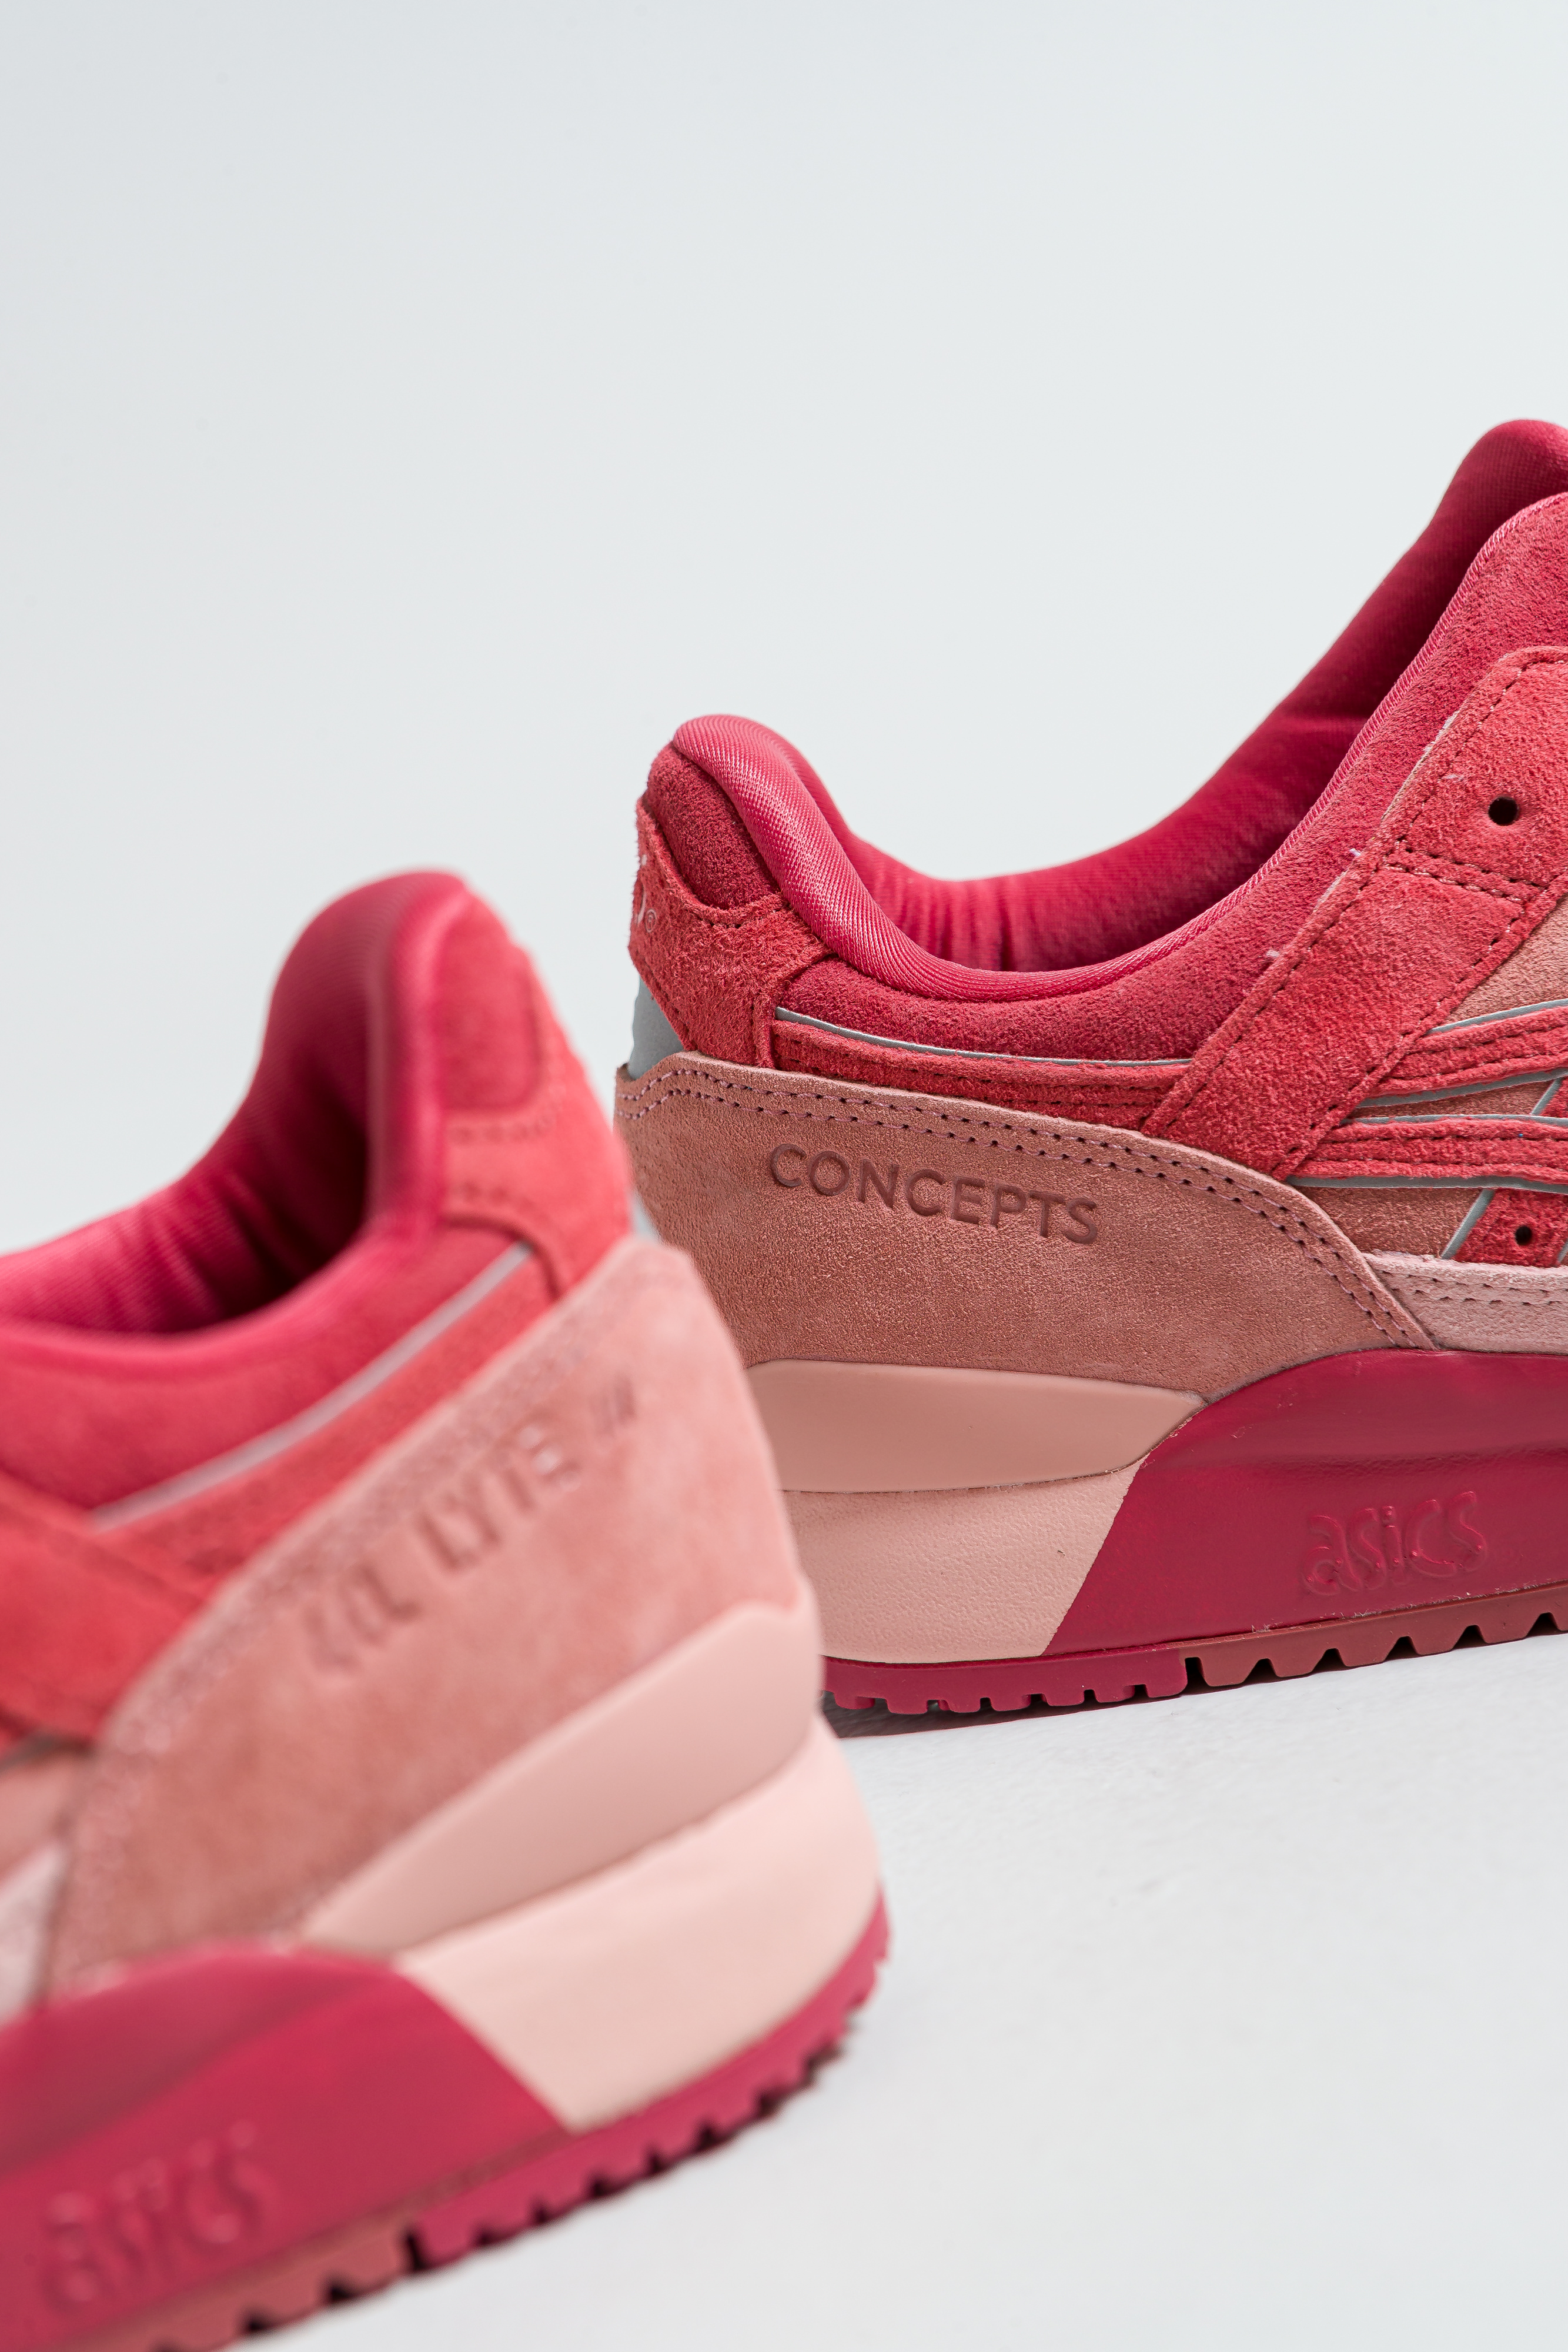 Up There Store - Asics X Concepts Gel-Lyte III 'Otoro'